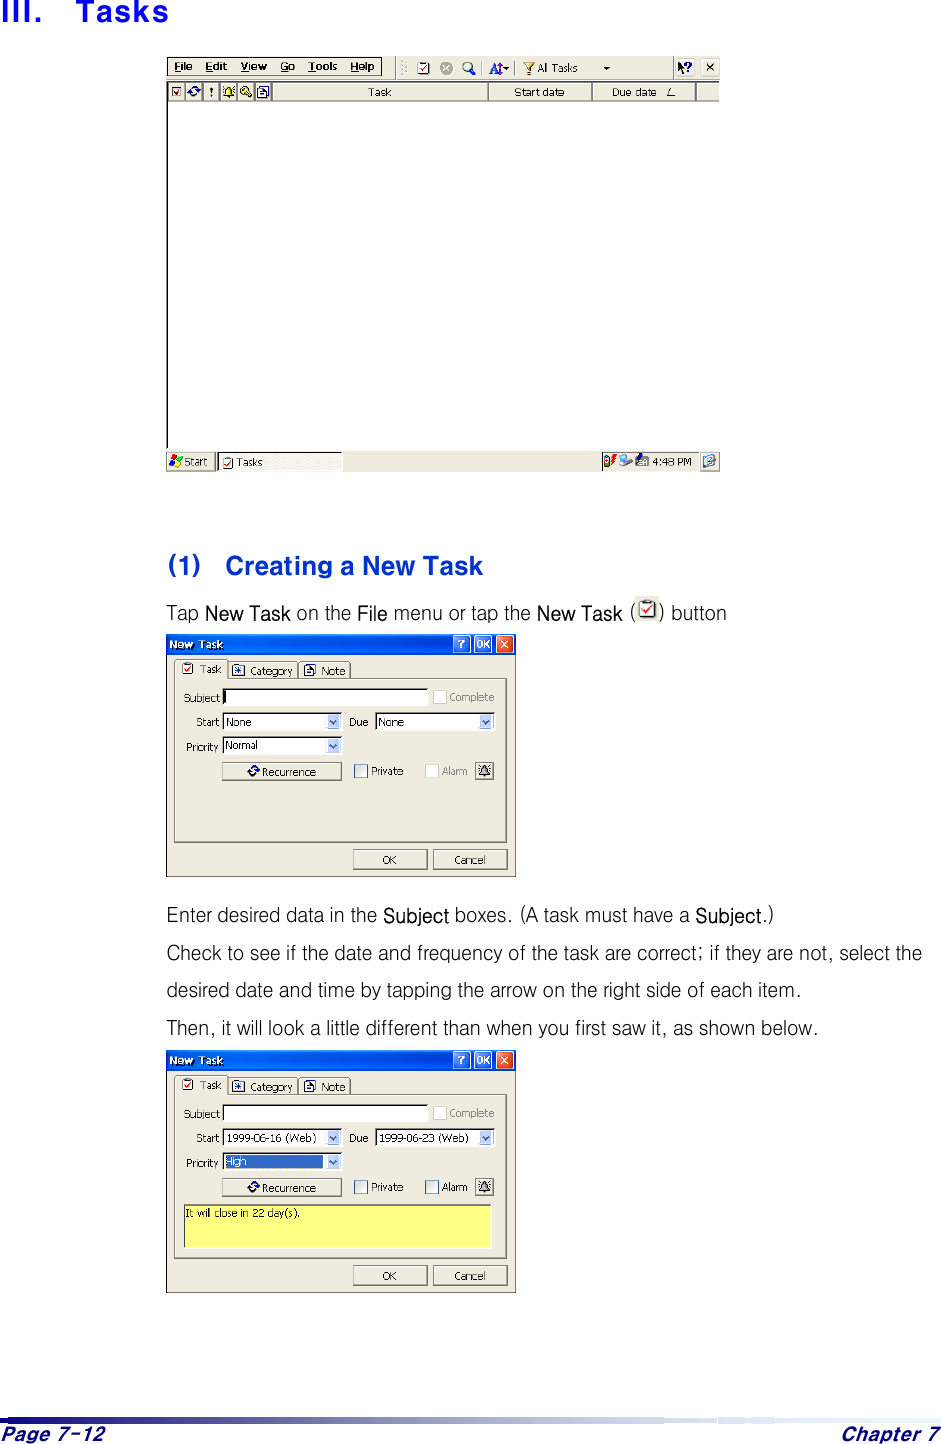 Page 7-12  Chapter 7 III.  Tasks              (1)  Creating a New Task Tap New Task on the File menu or tap the New Task ( ) button         Enter desired data in the Subject boxes. (A task must have a Subject.)  Check to see if the date and frequency of the task are correct; if they are not, select the desired date and time by tapping the arrow on the right side of each item. Then, it will look a little different than when you first saw it, as shown below.          